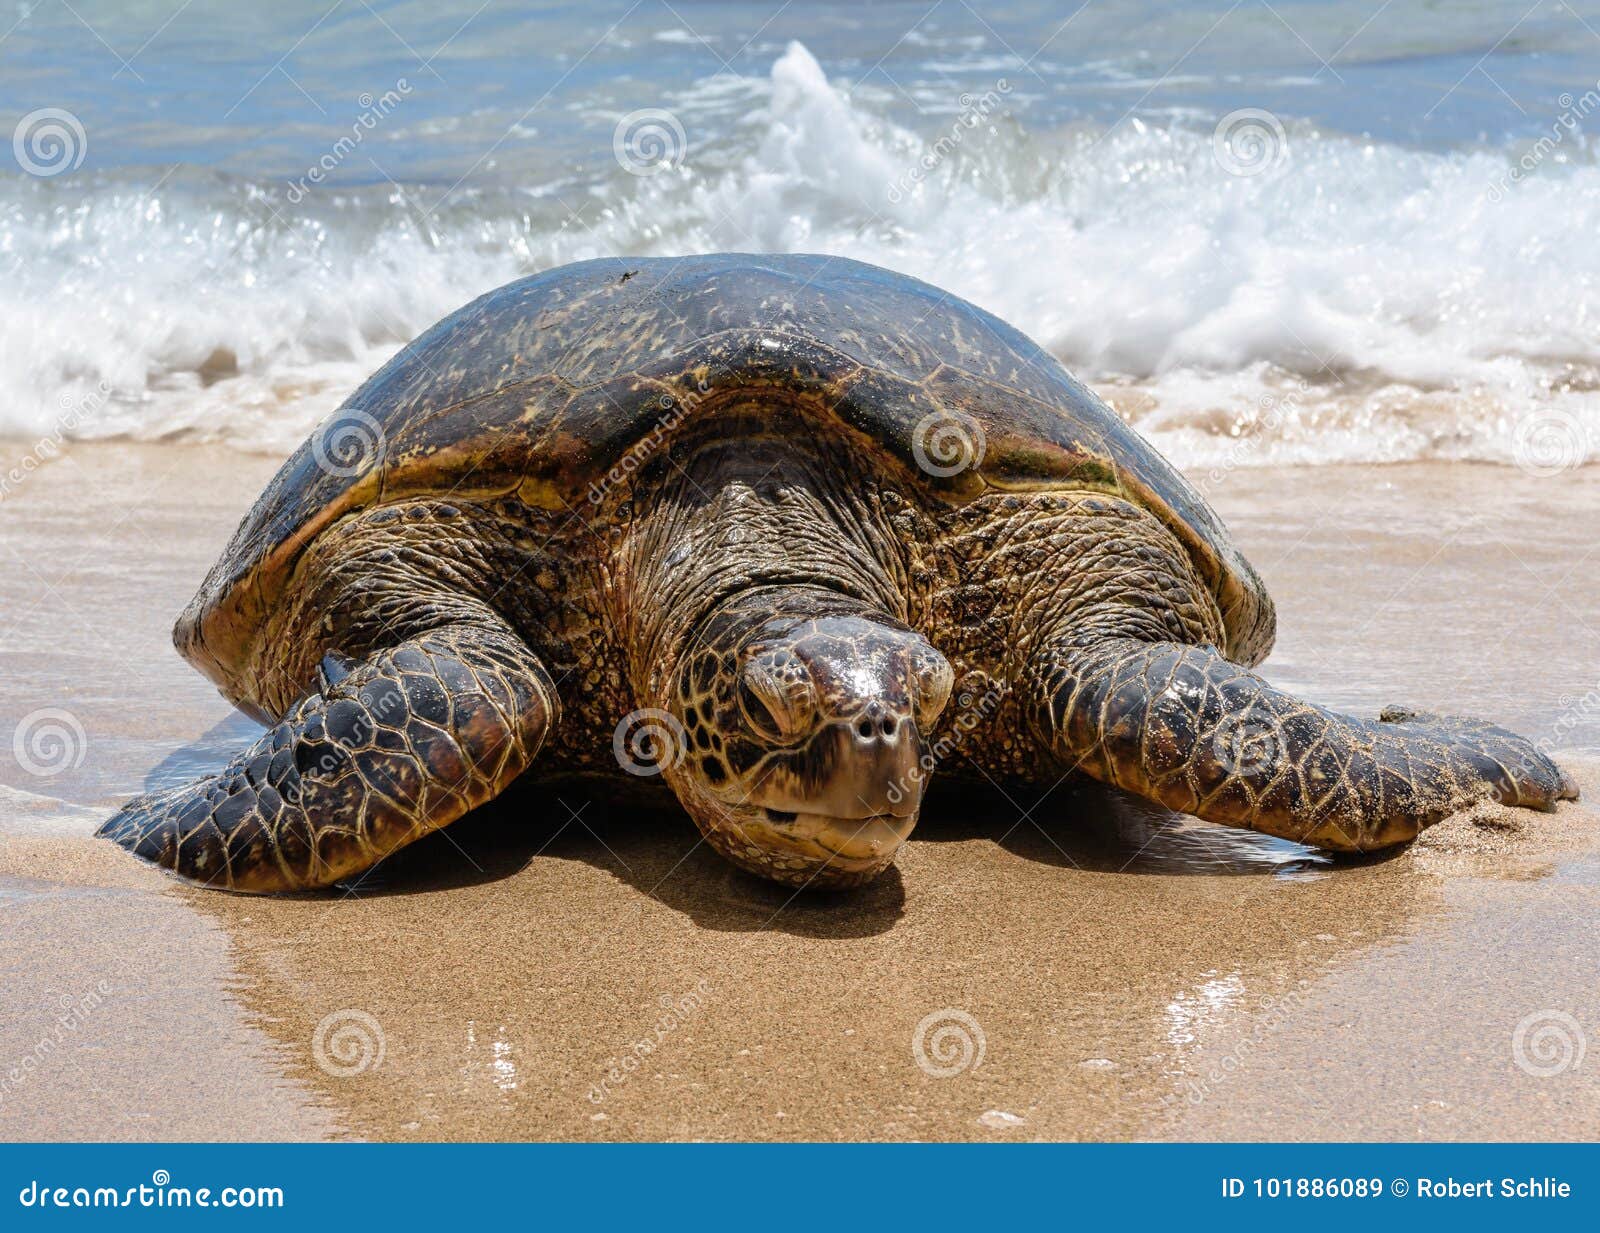 Giant Green Sea Turtle Laying on the Warm Sand Stock Image - Image of